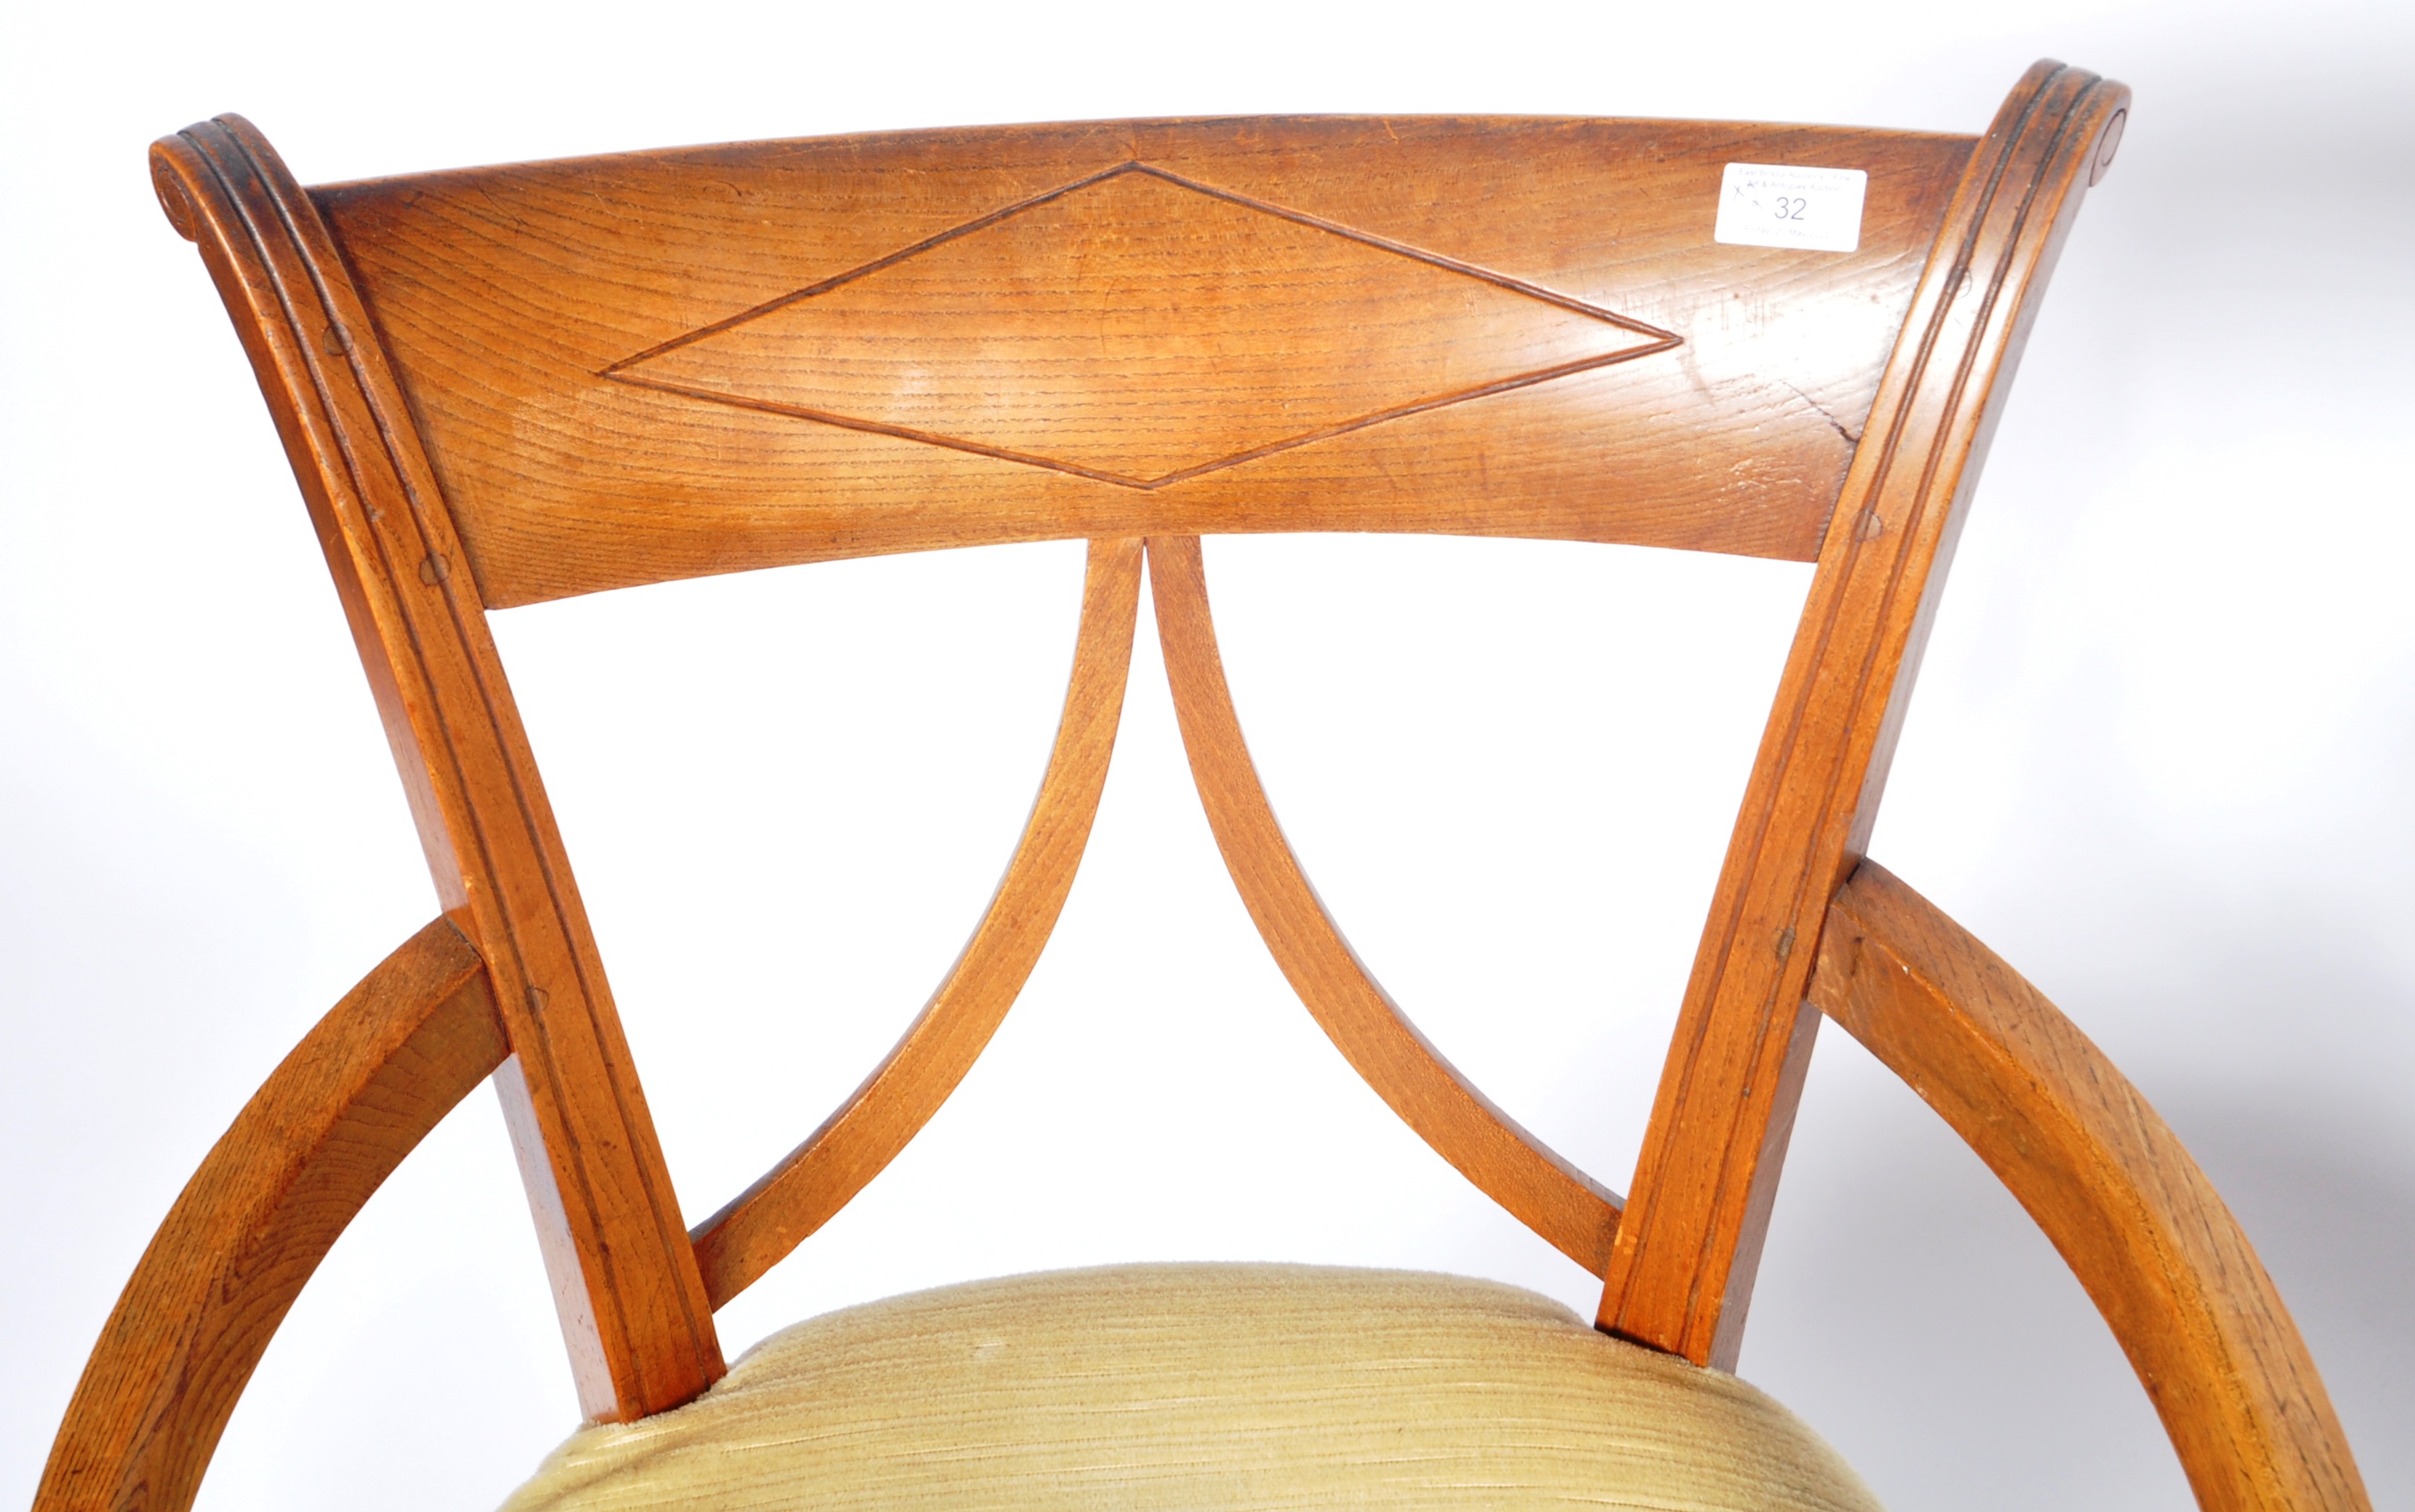 PAIR OF EARLY 19TH CENTURY ASH COUNTRY CHAIRS - Image 3 of 8